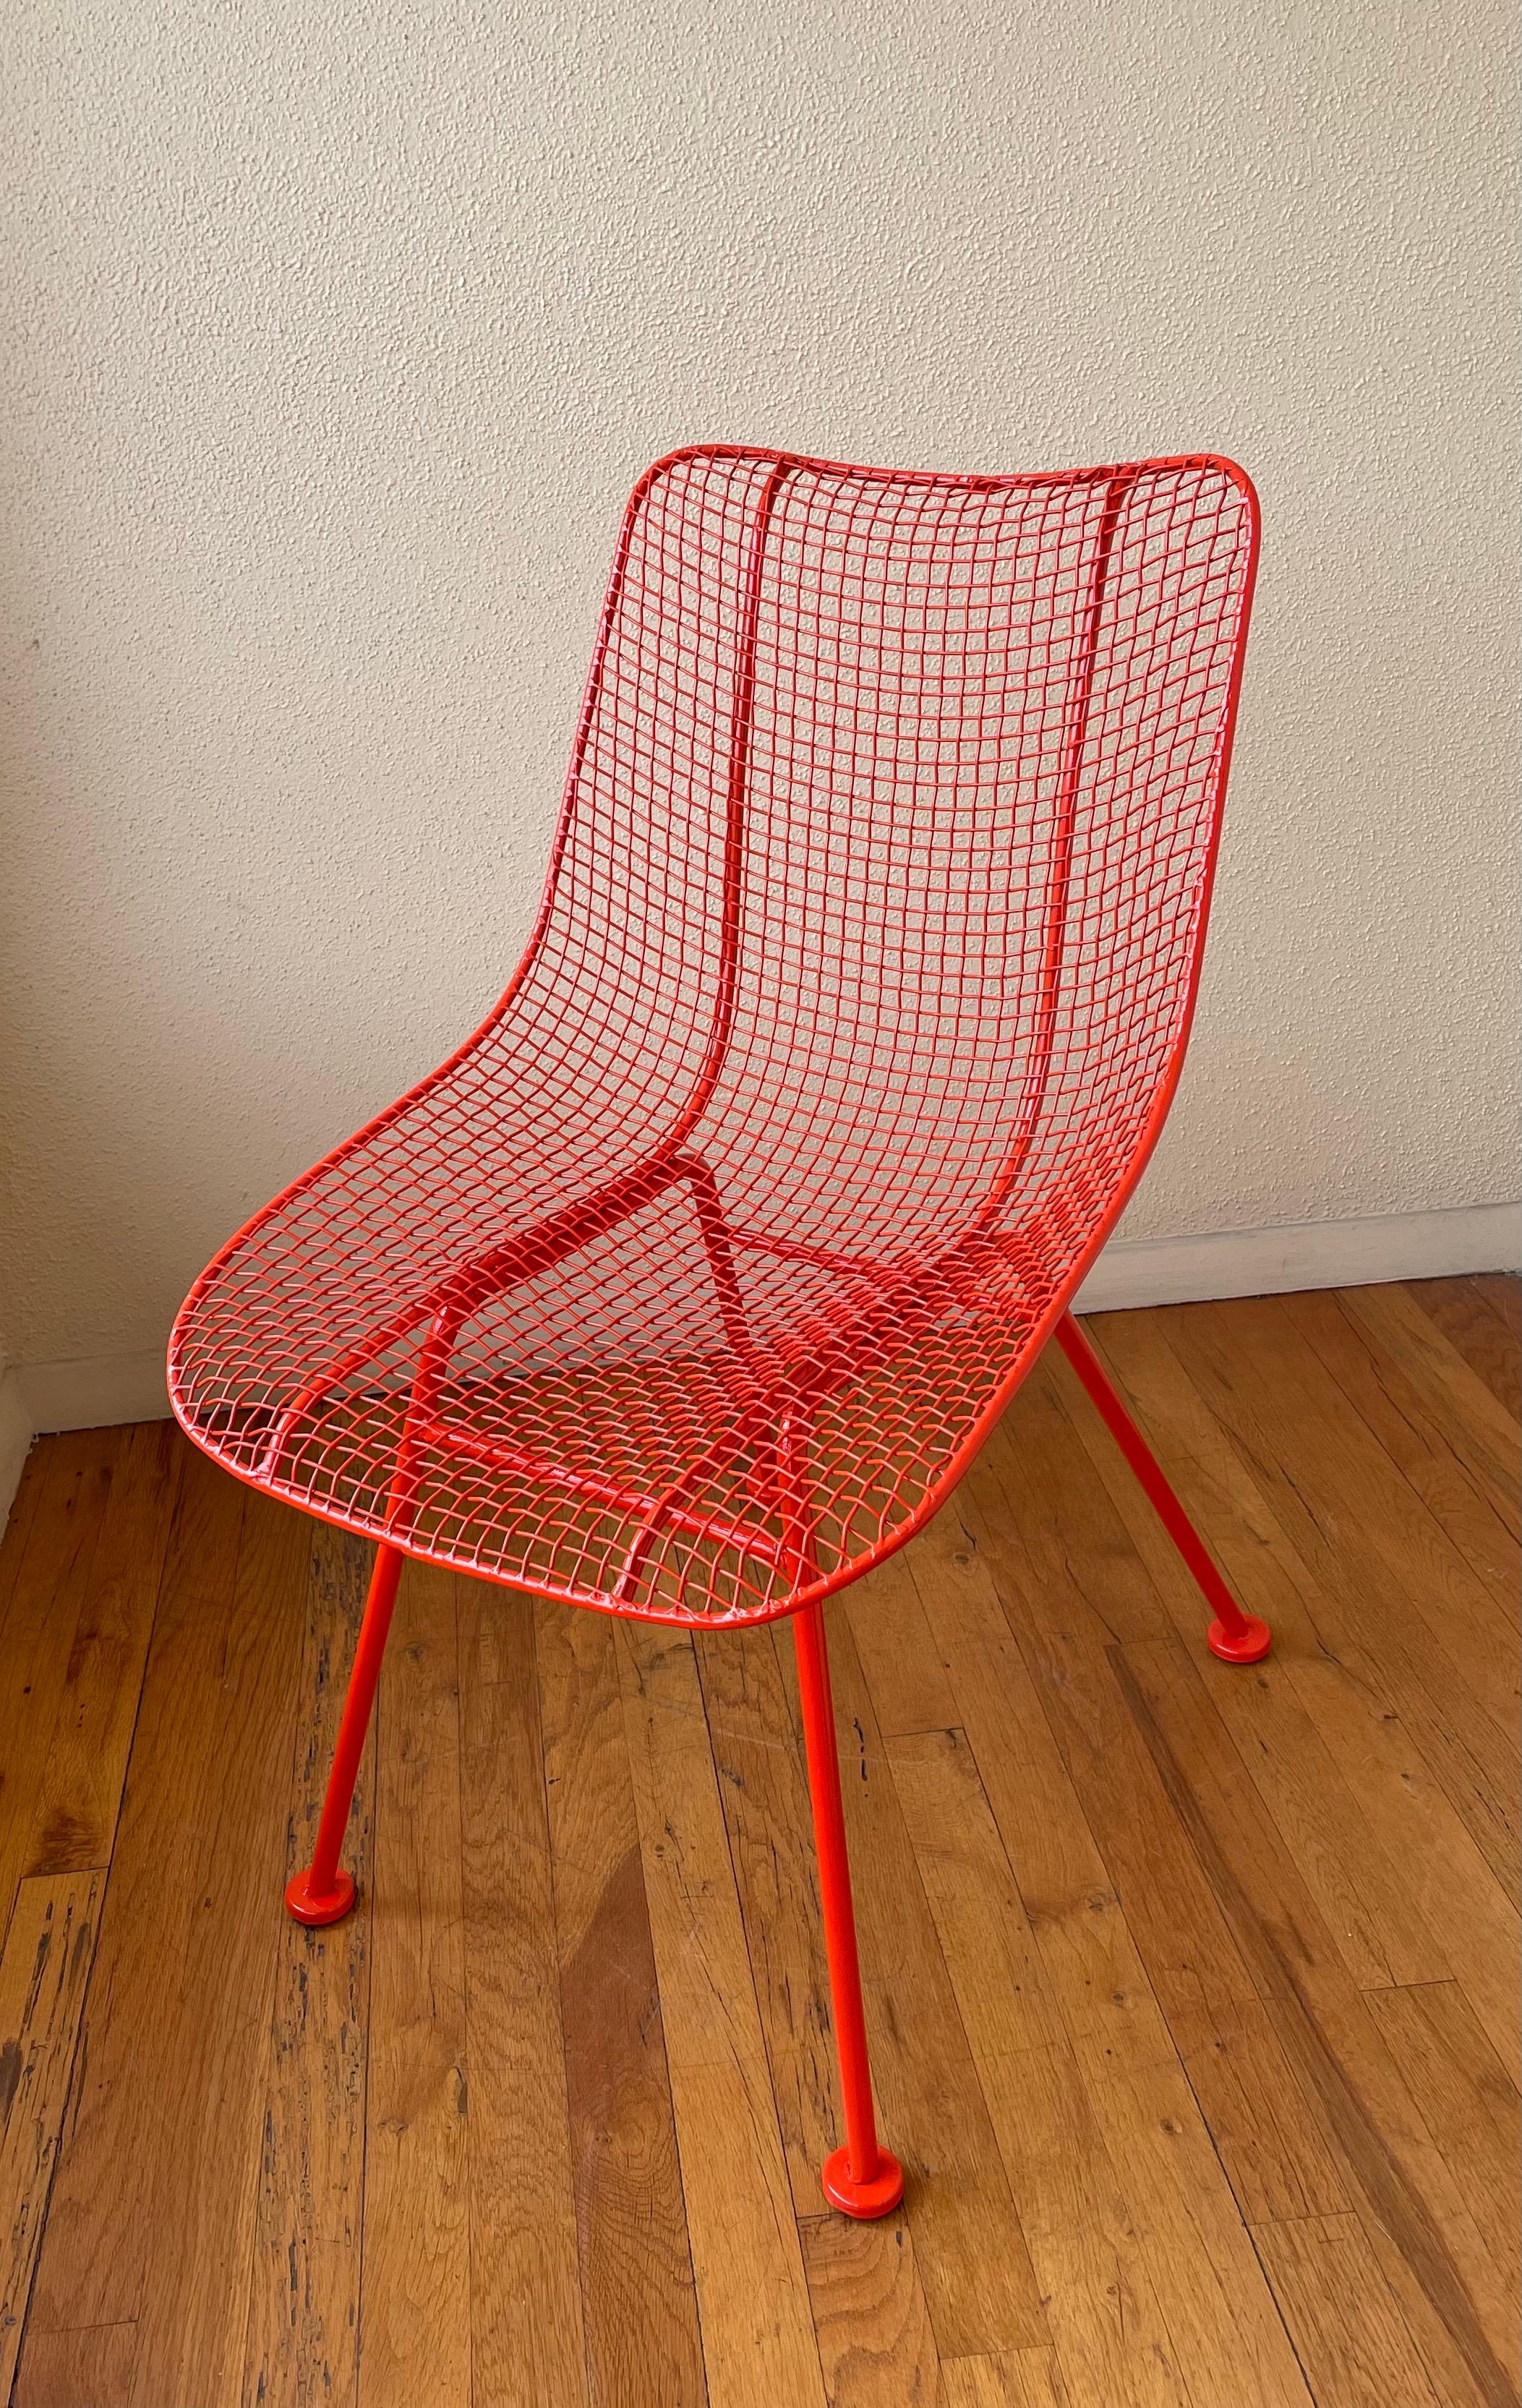 American Mid-Century Modern Sulptura Chair Design by Russell Woodard In Excellent Condition For Sale In San Diego, CA